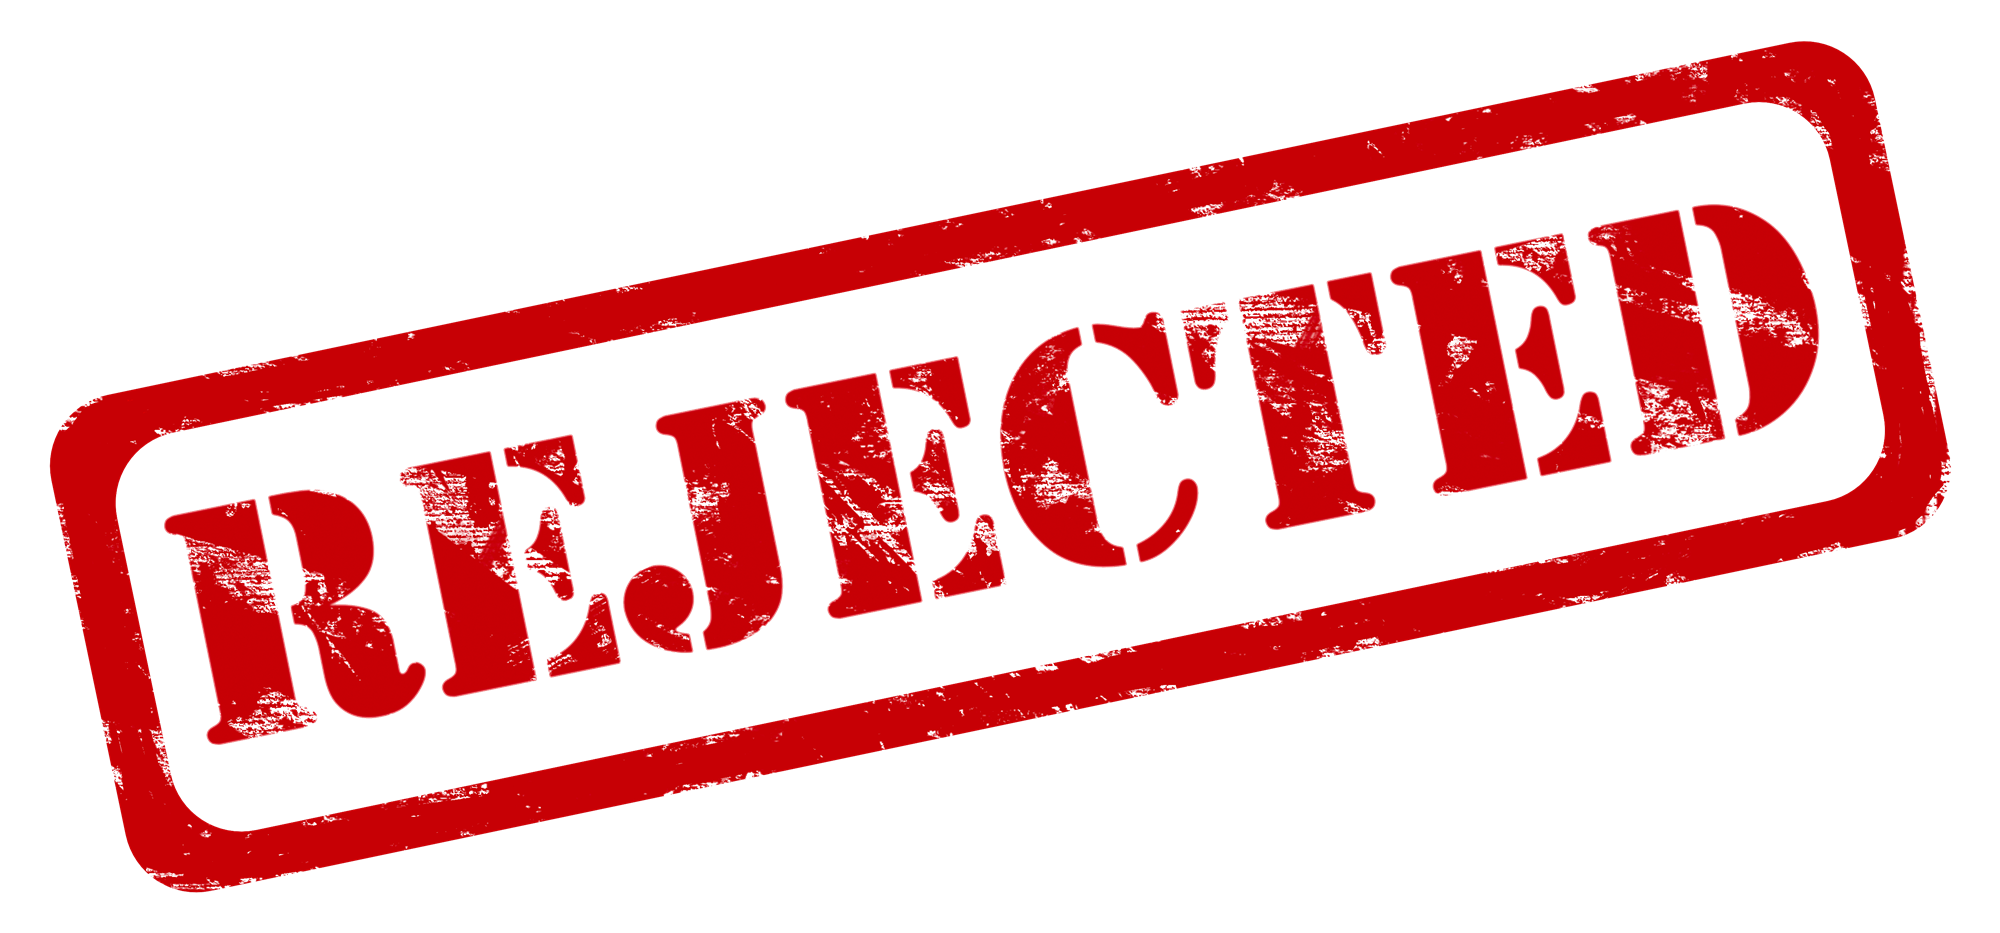 Download Rejected Stamp Png Images Transparent Gallery. Advertisement - Denied Stamp, Transparent background PNG HD thumbnail